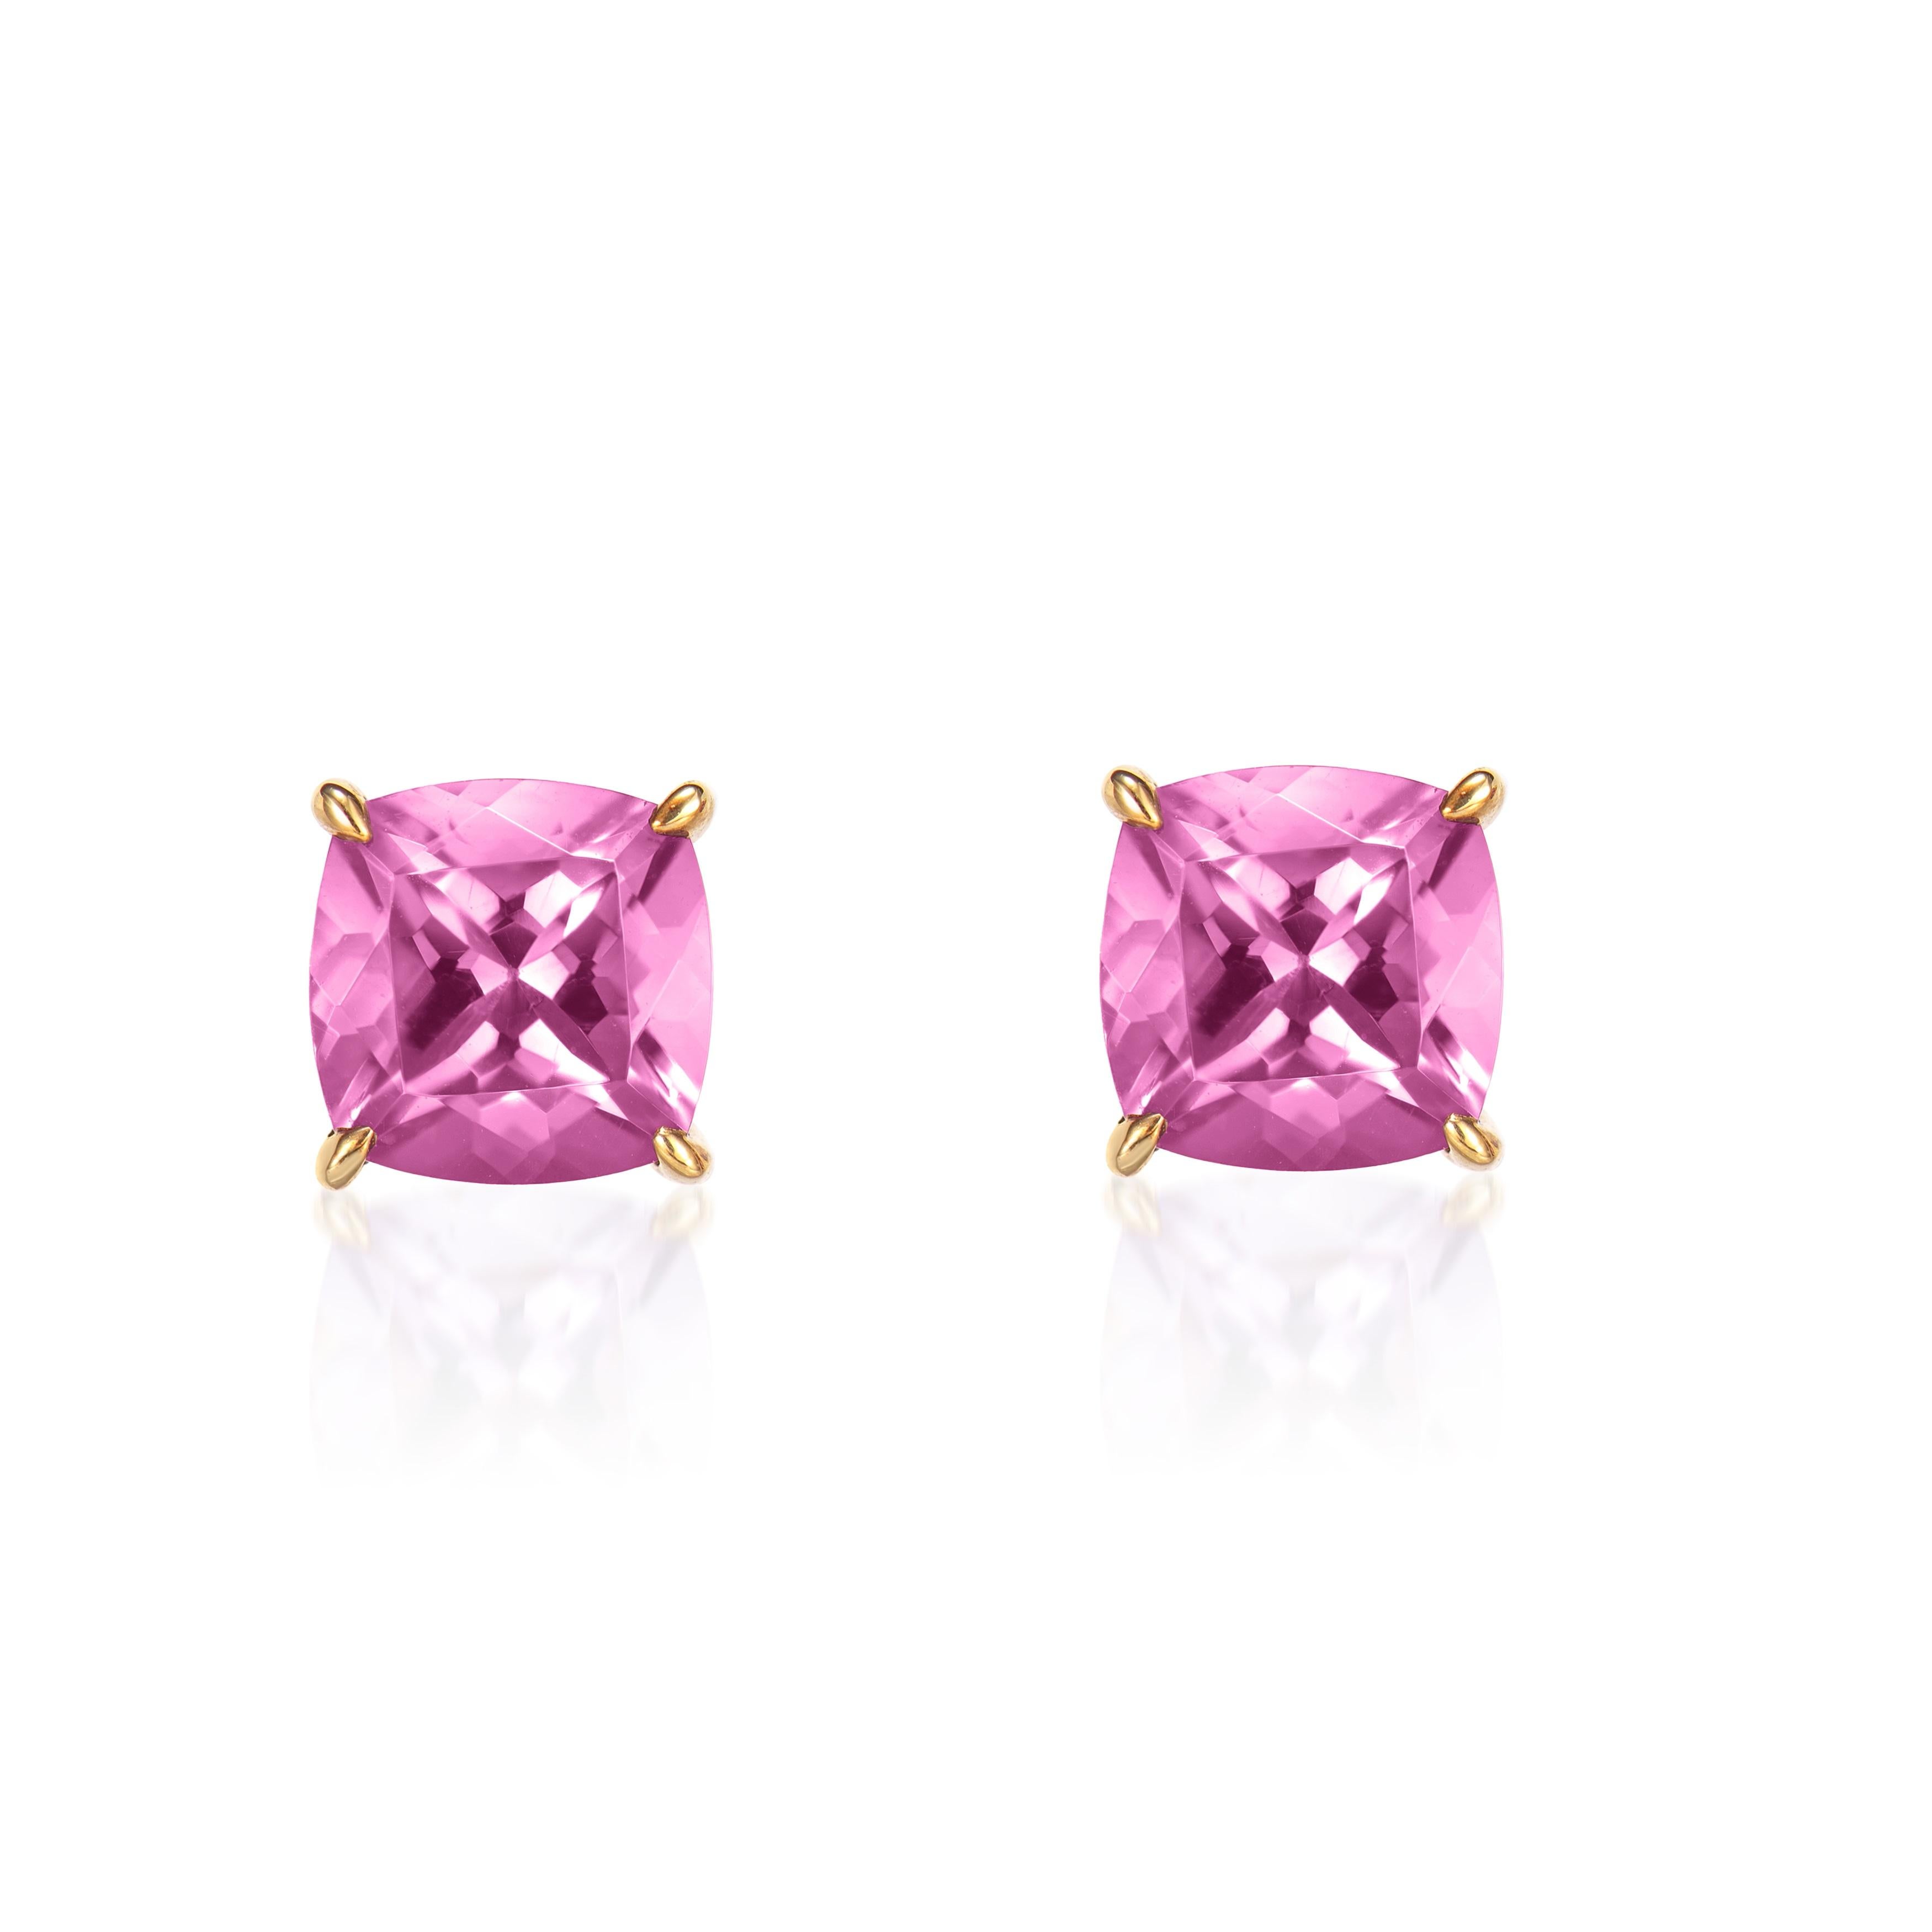 Contemporary 2.59 Carat Rhodolite Stud Earring in 18Karat Yellow Gold. For Sale